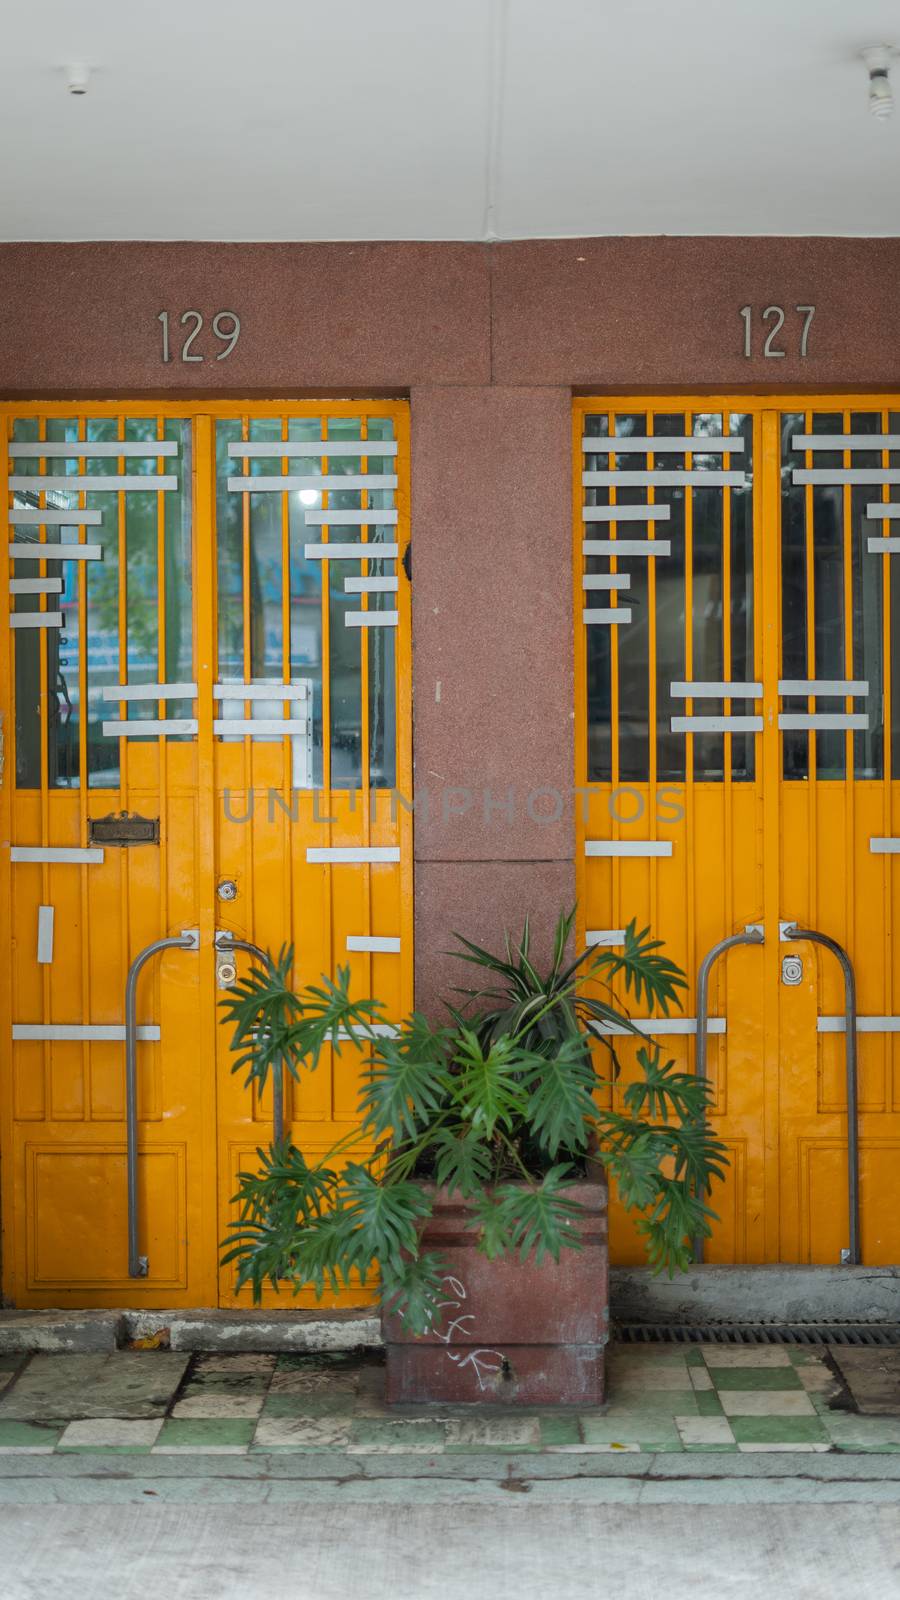 Portrait style picture of two orange doors with a plant in between, and the numbers 129 and 127 over them